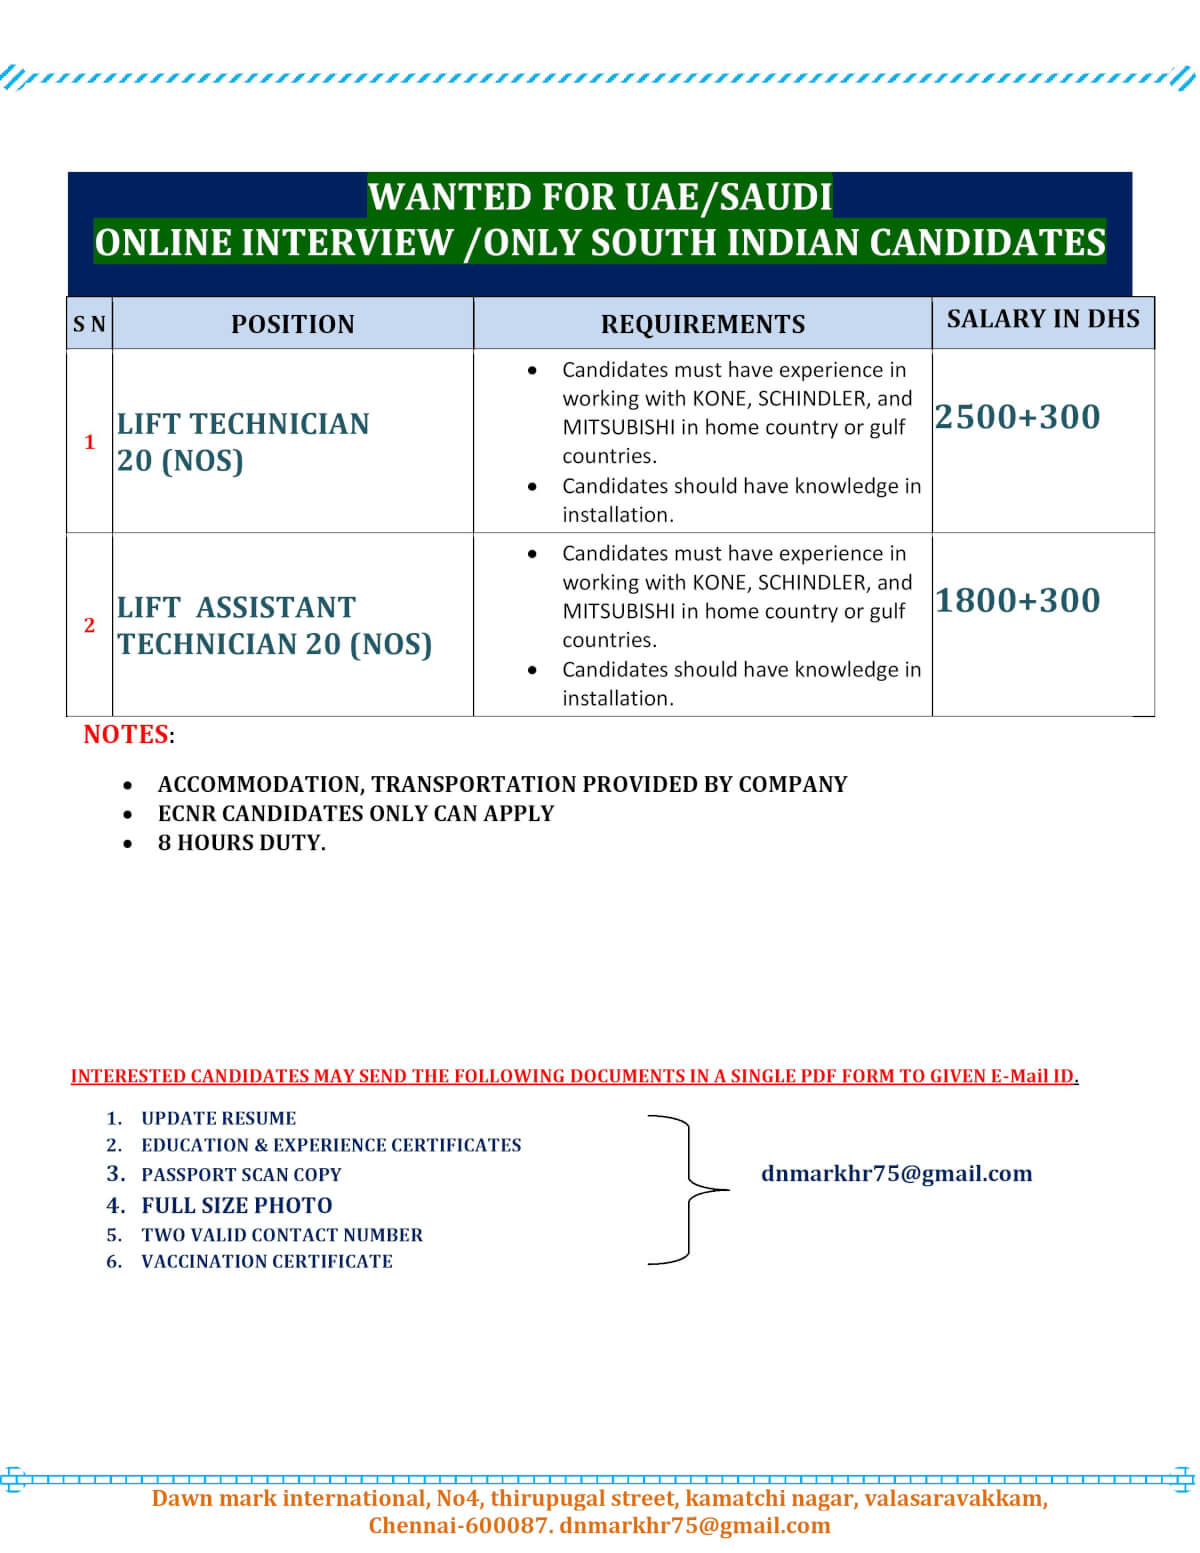 WANTED FOR UAE/SAUDI ONLINE INTERVIEW /ONLY SOUTH INDIAN CANDIDATES